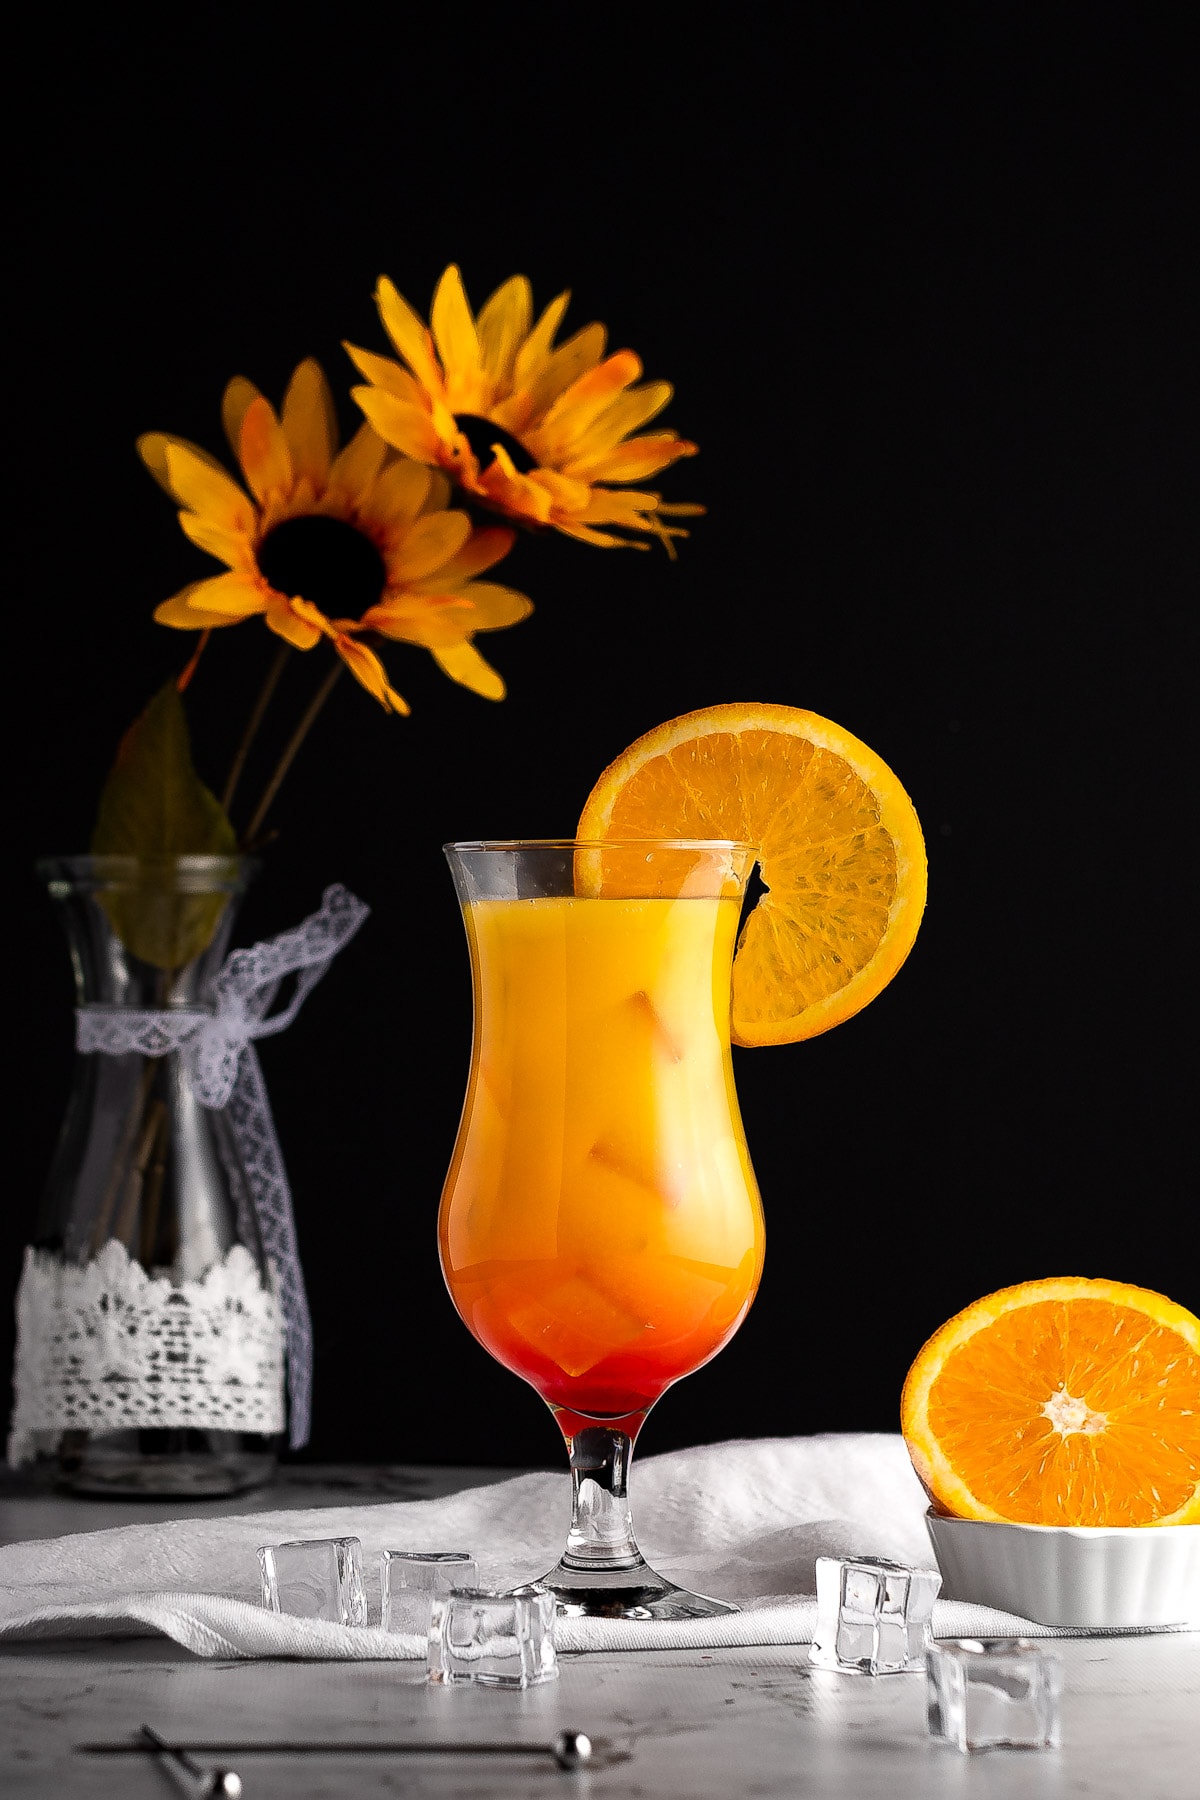 Sunrise drink in a tall cocktail glass, on a white linen napkin, next to ice cubes and a sliced orange, with yellow flowers in the background.